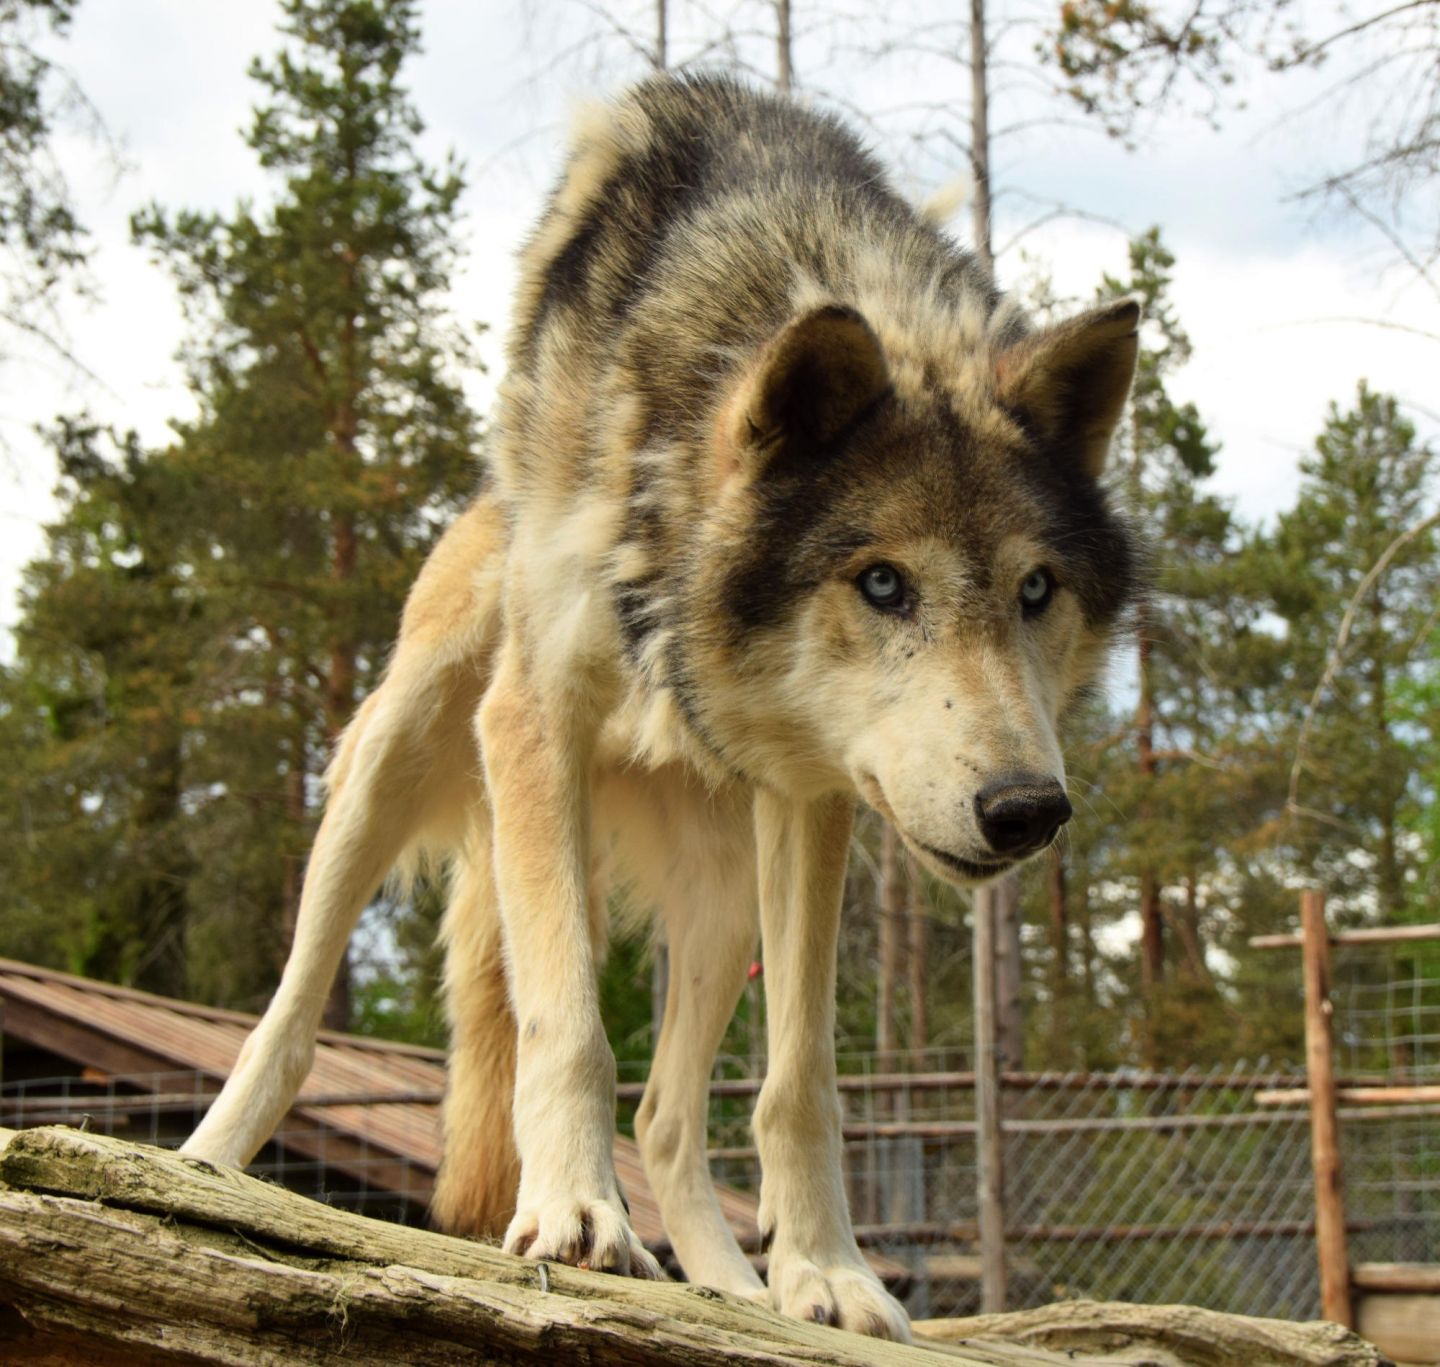 Big dog, during a fam trip in Finnish Lapland with location scout Lori Balton